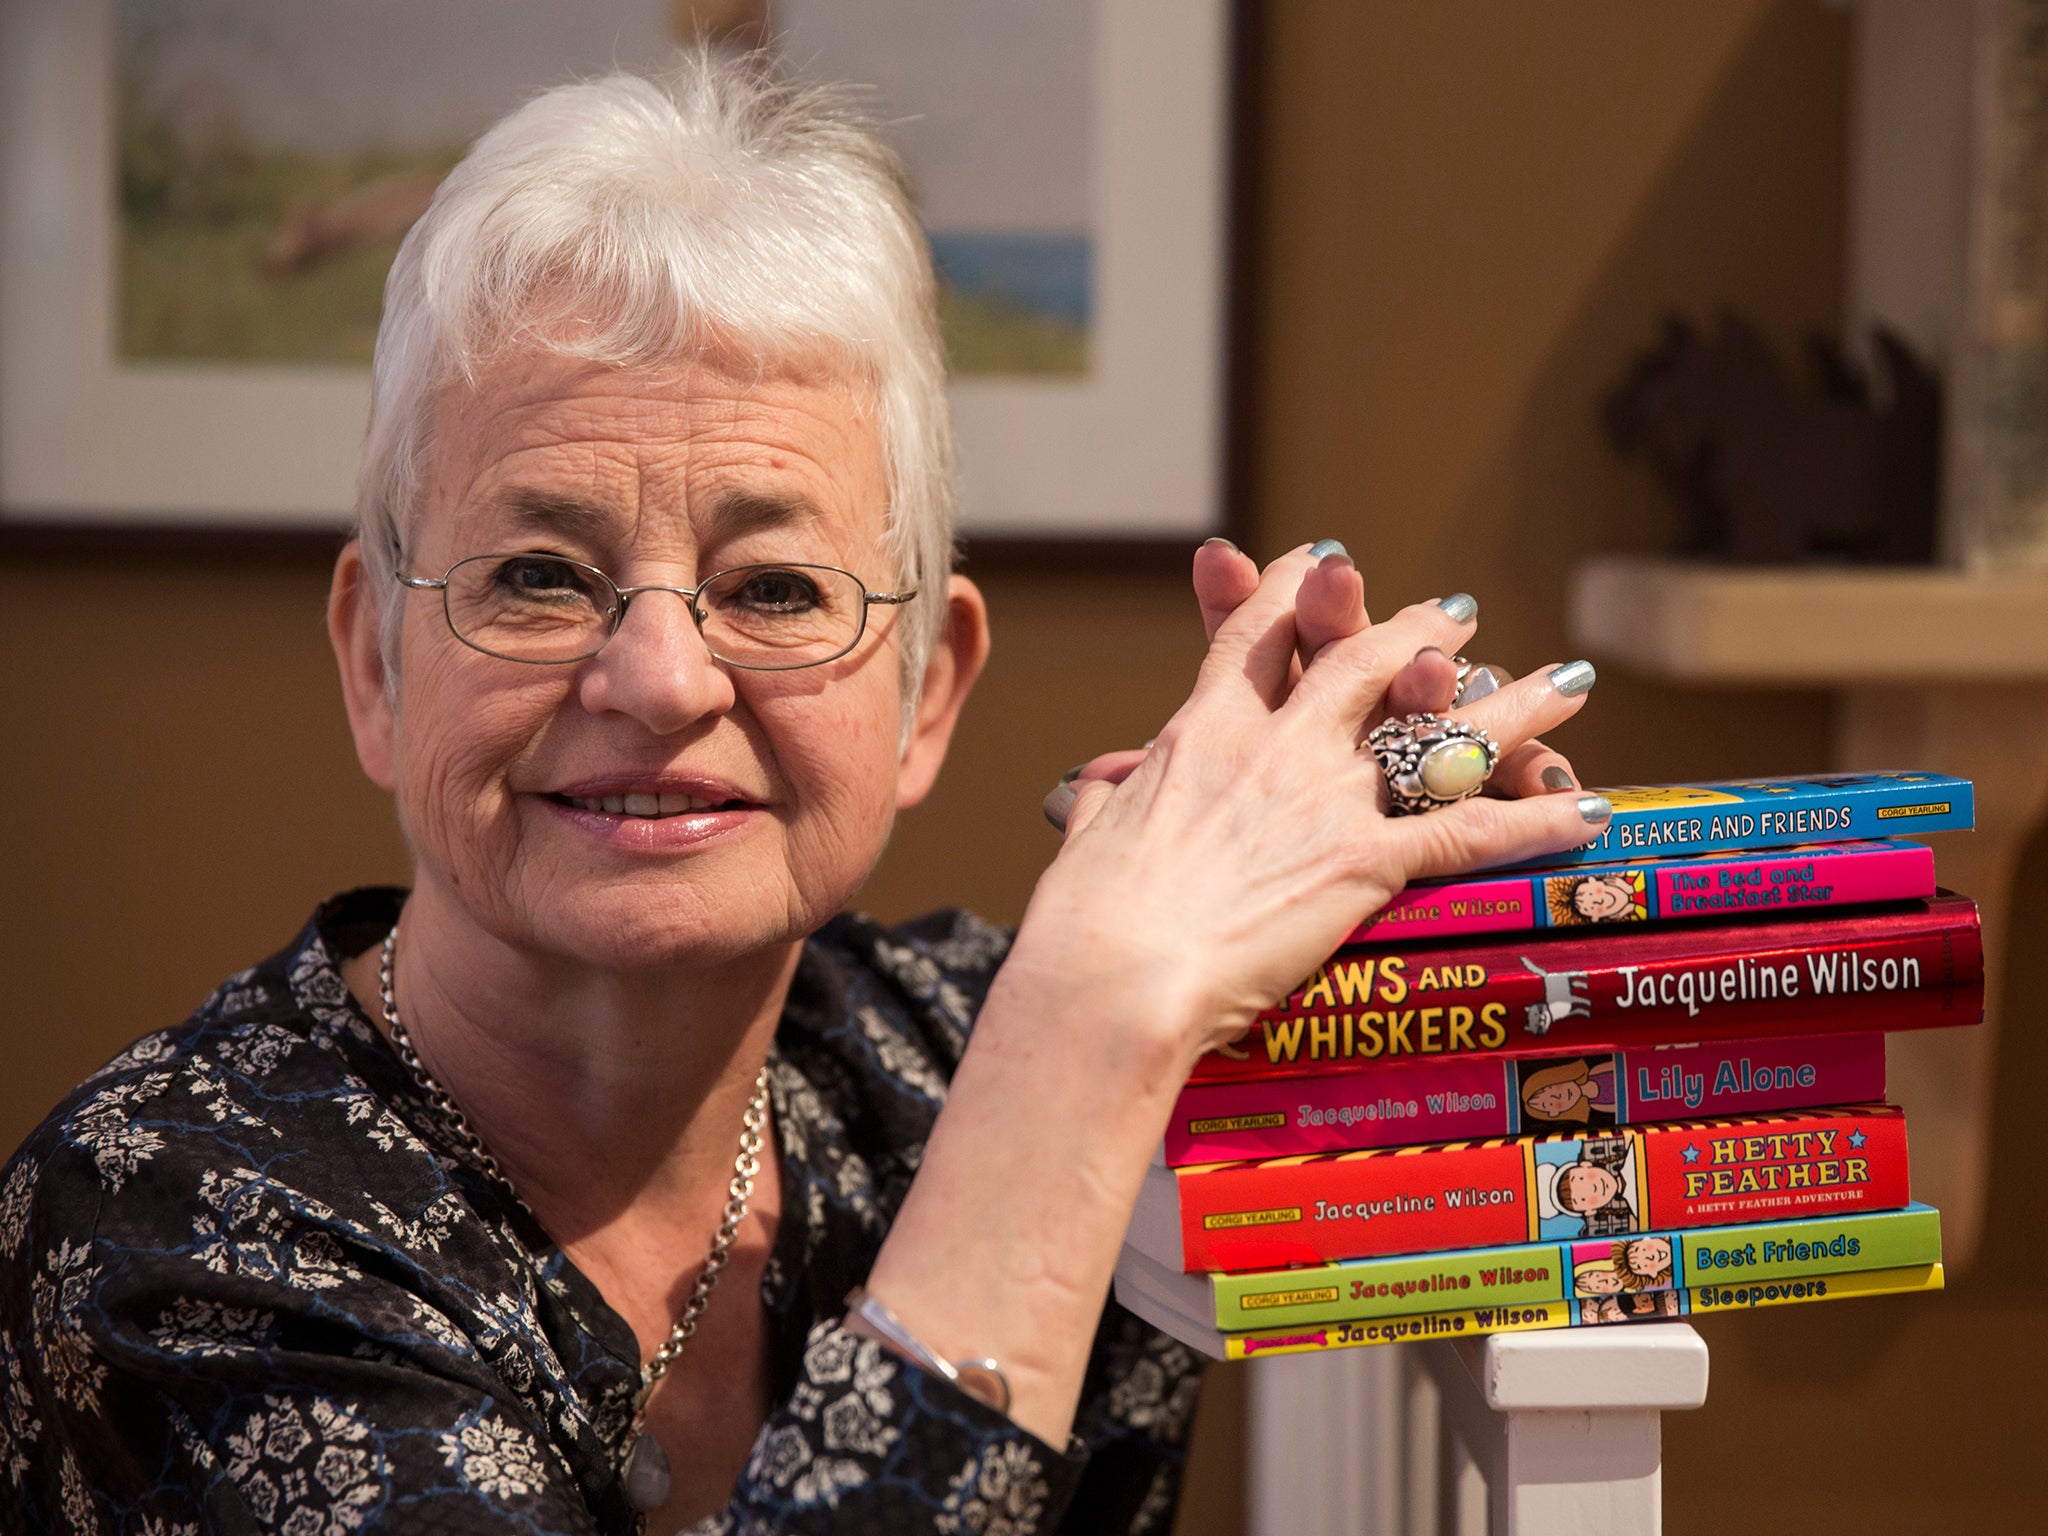 Children's author Jacqueline Wilson: 'When I was younger I was in a straight marriage, so I never really had to go through any kind of teasing'